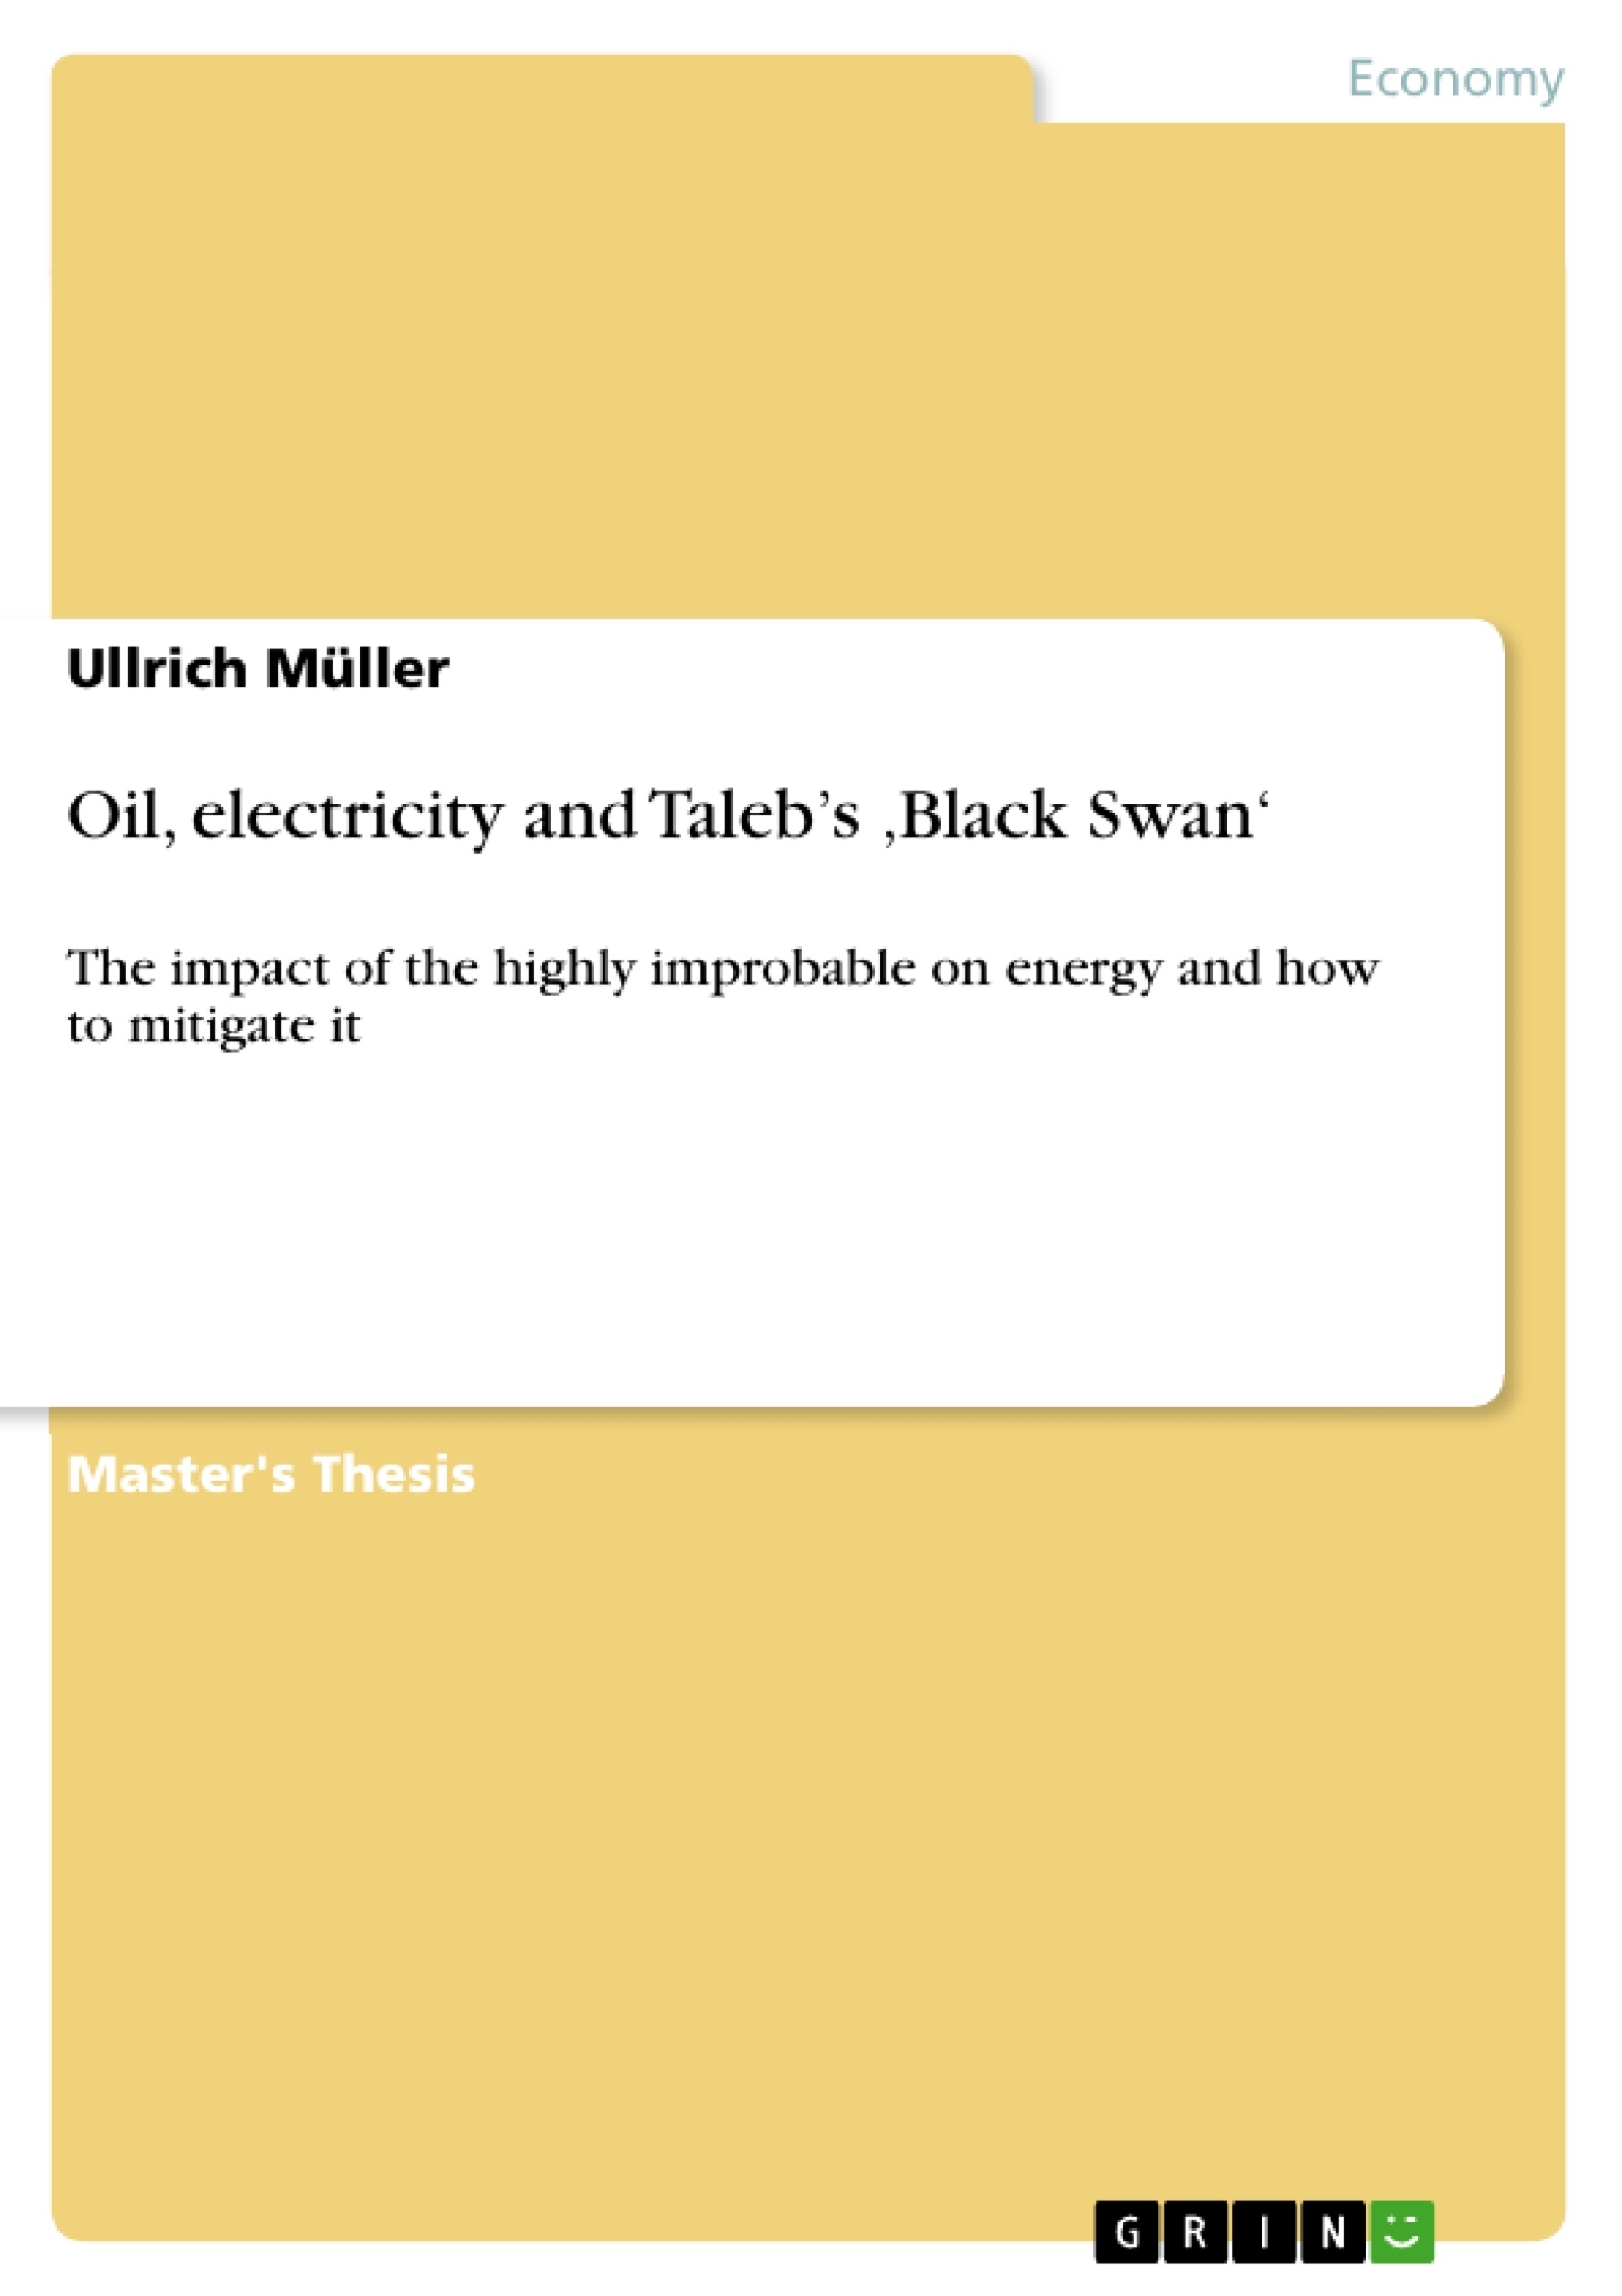 Título: Oil, electricity and Taleb’s ‚Black Swan‘